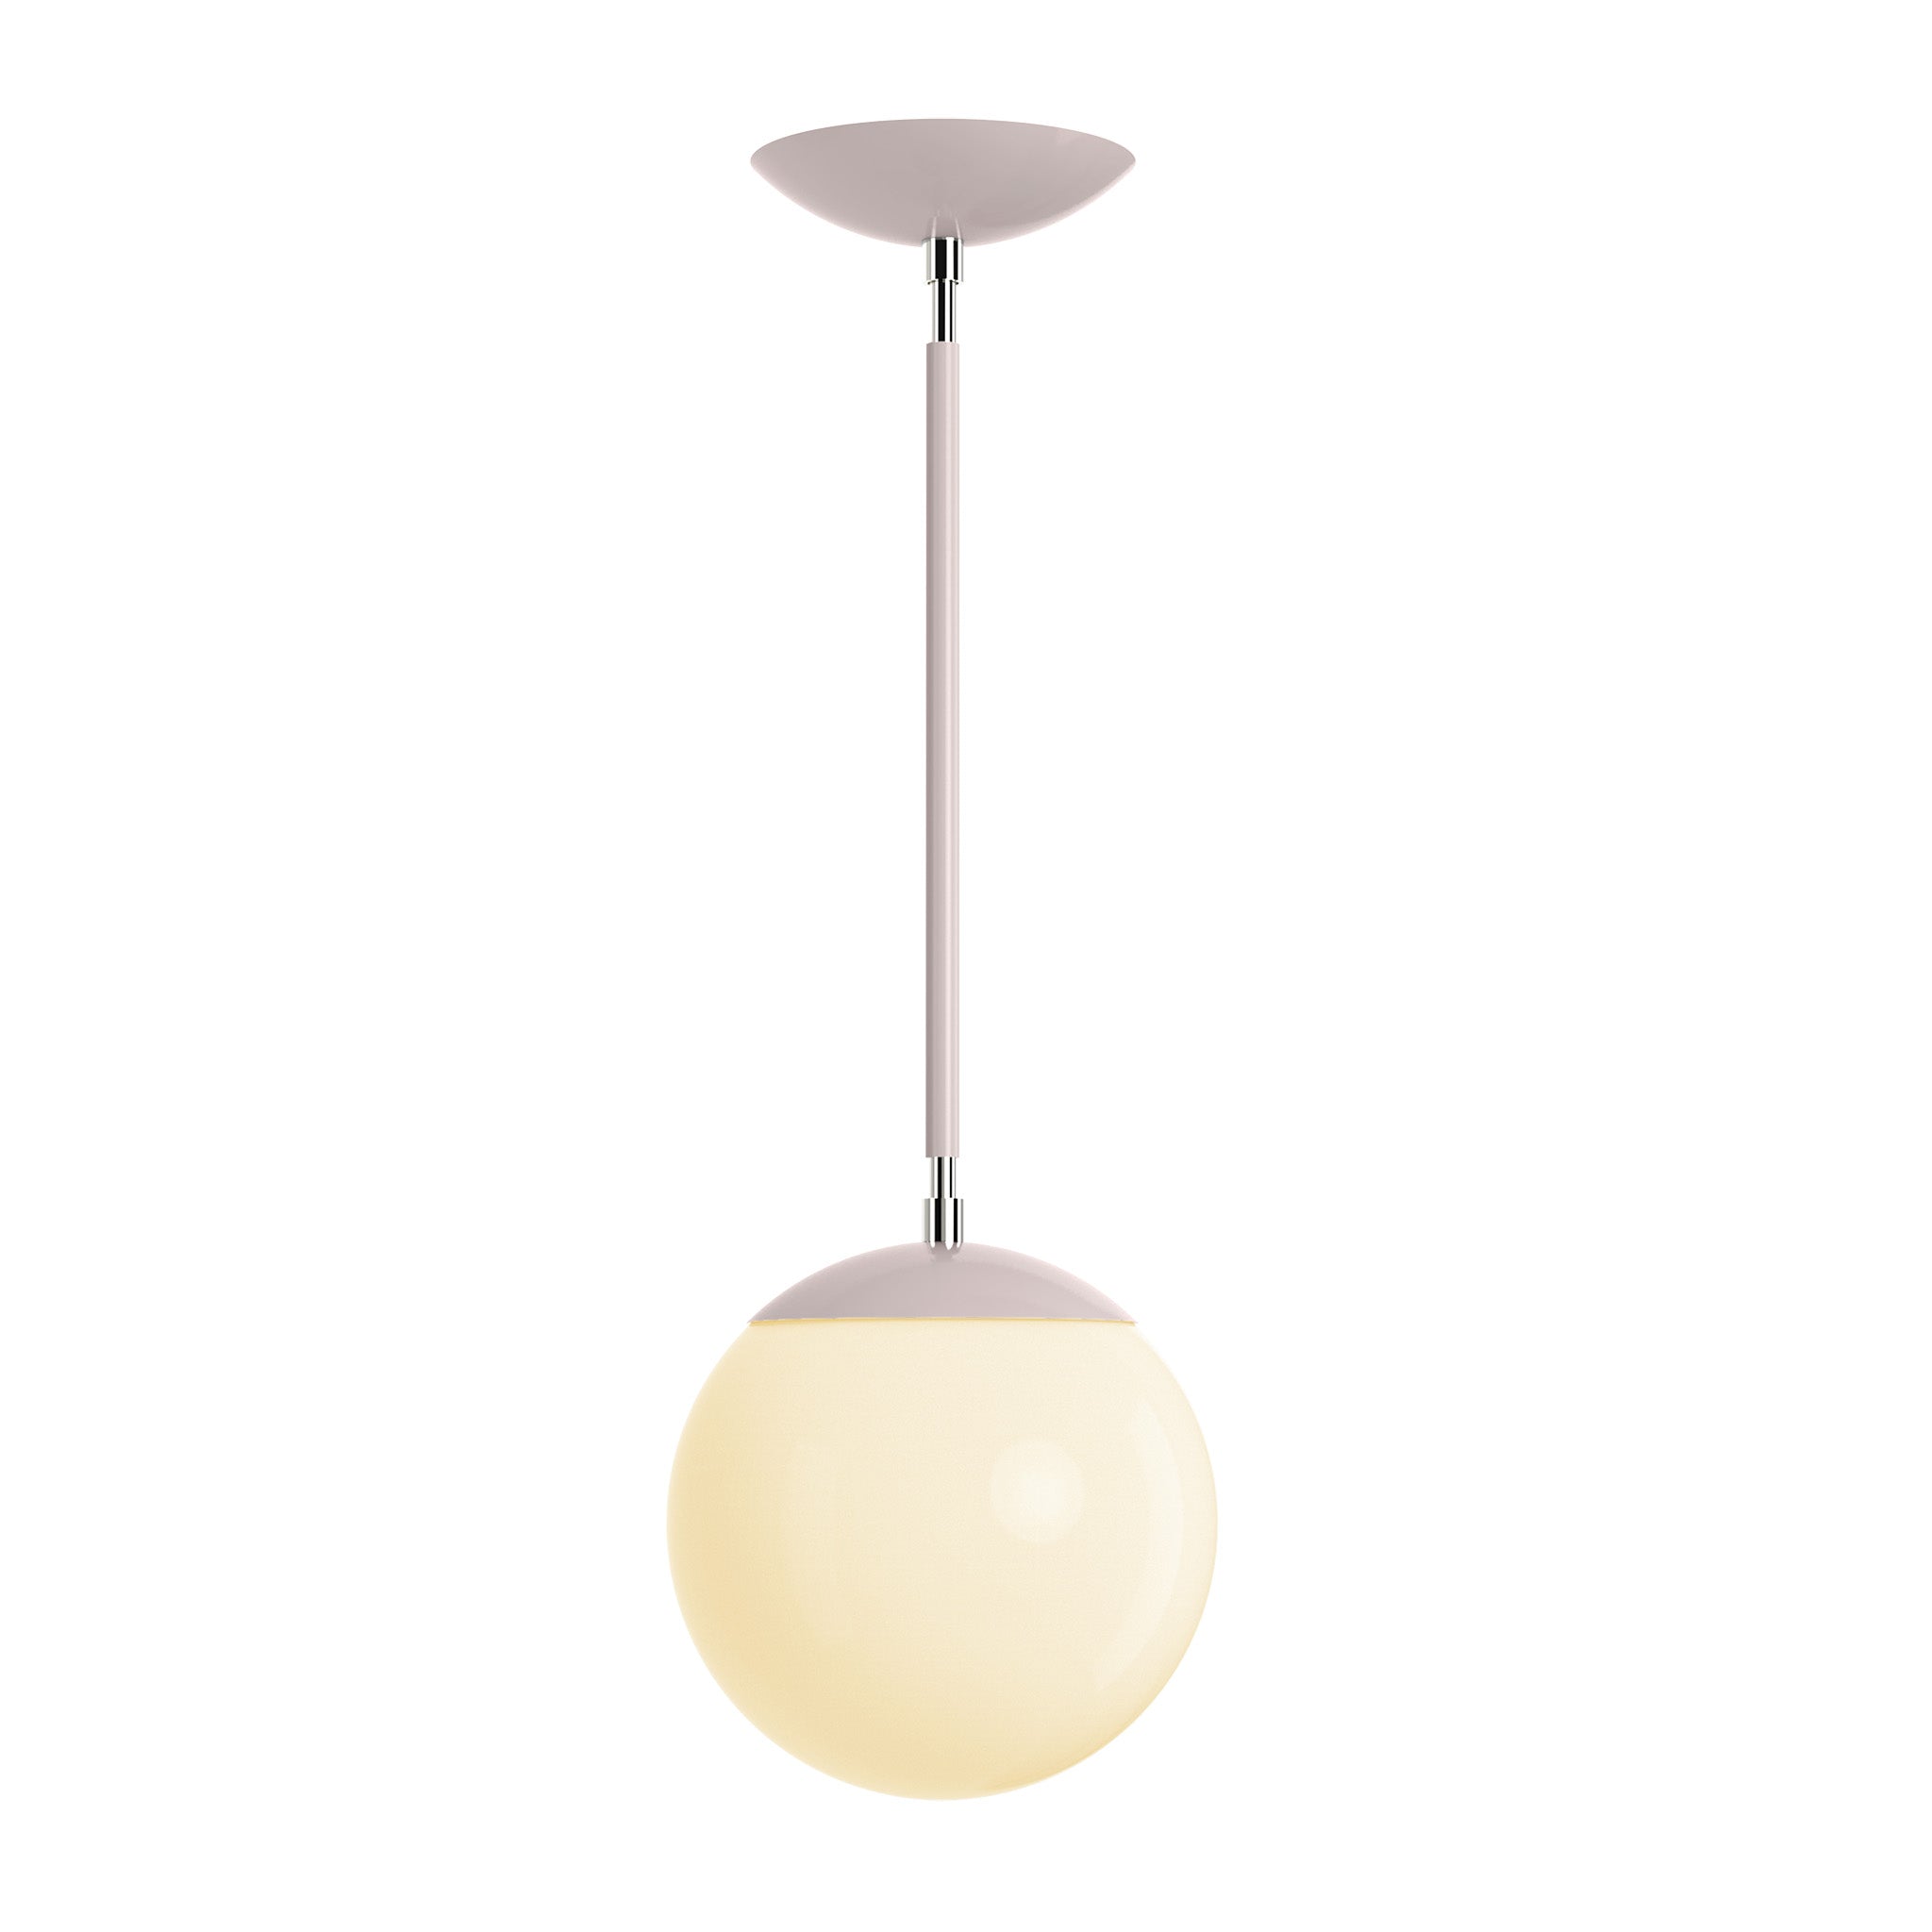 Polished nickel and barely cap globe pendant 8" dutton brown lighting